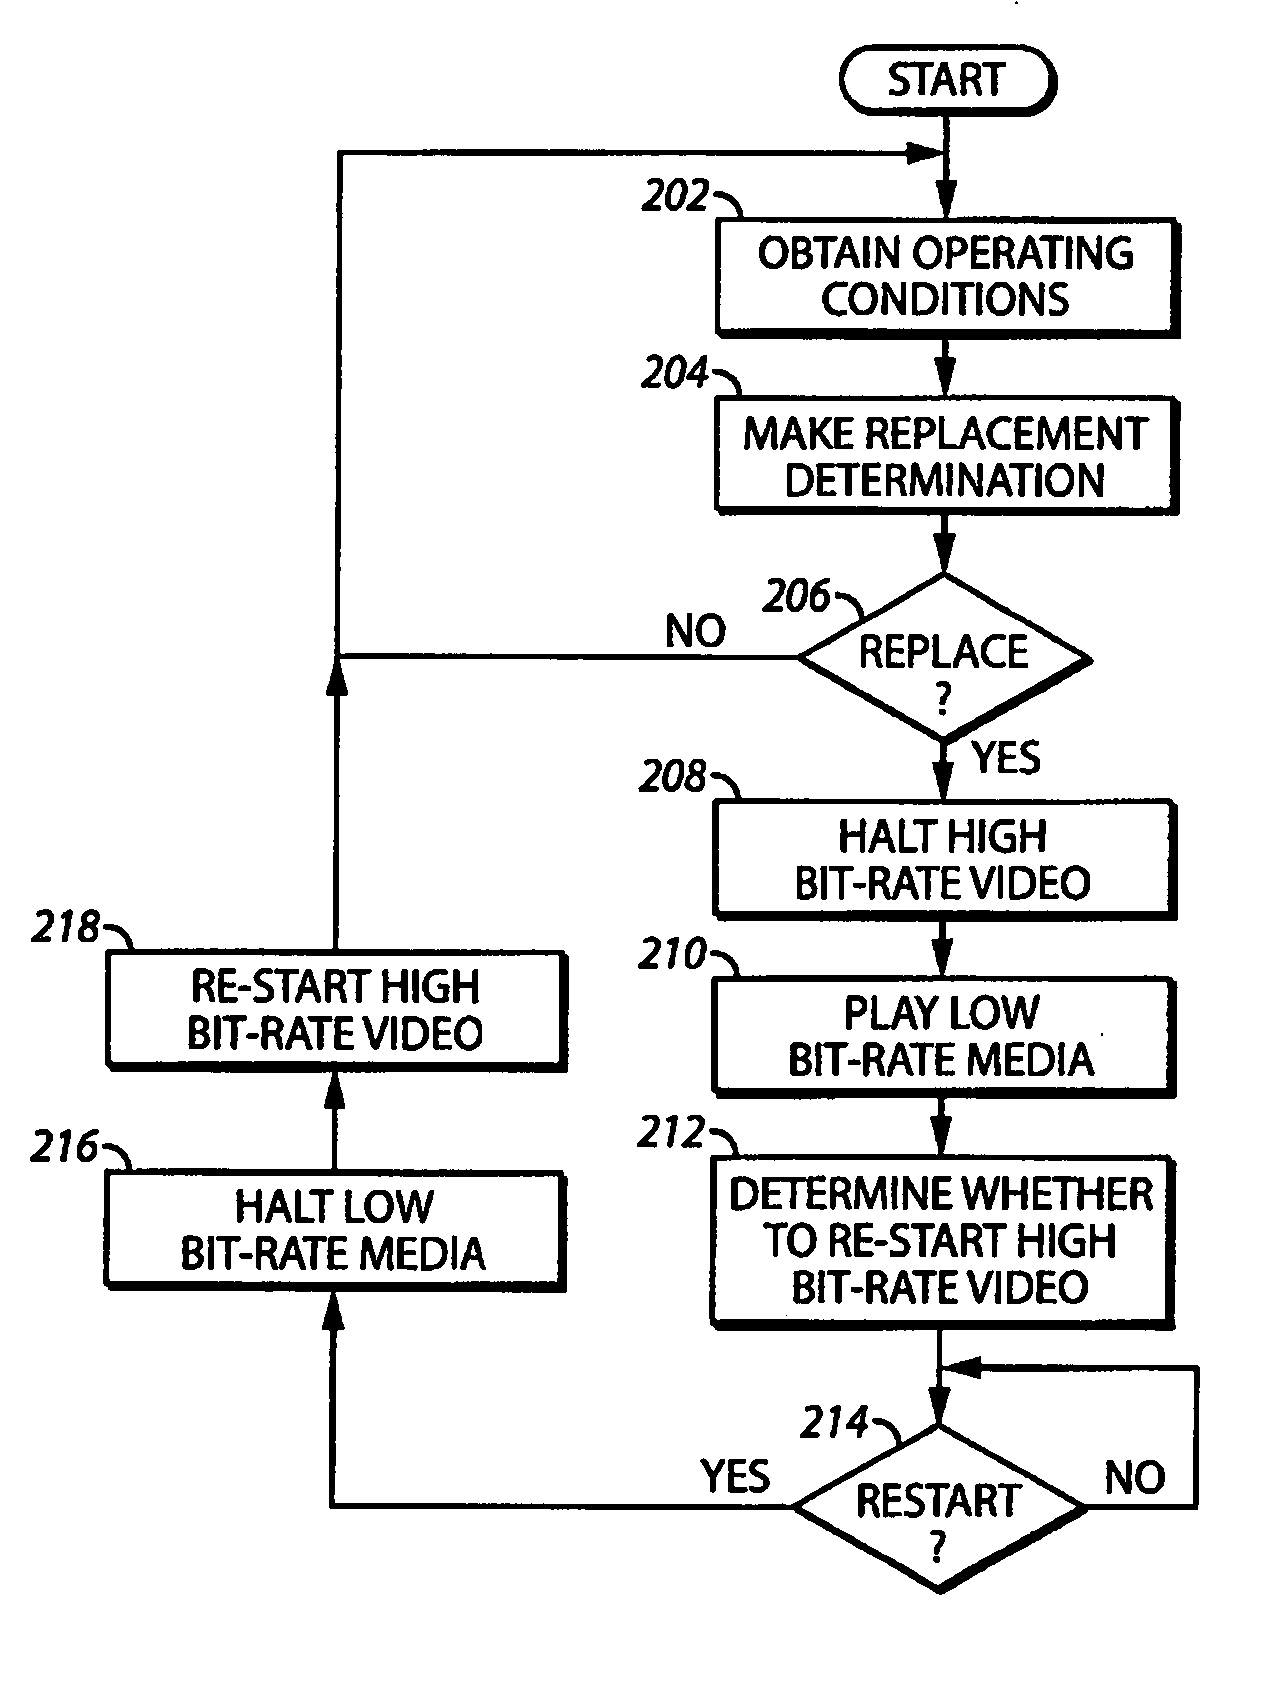 System and method for improving the capacity of a network